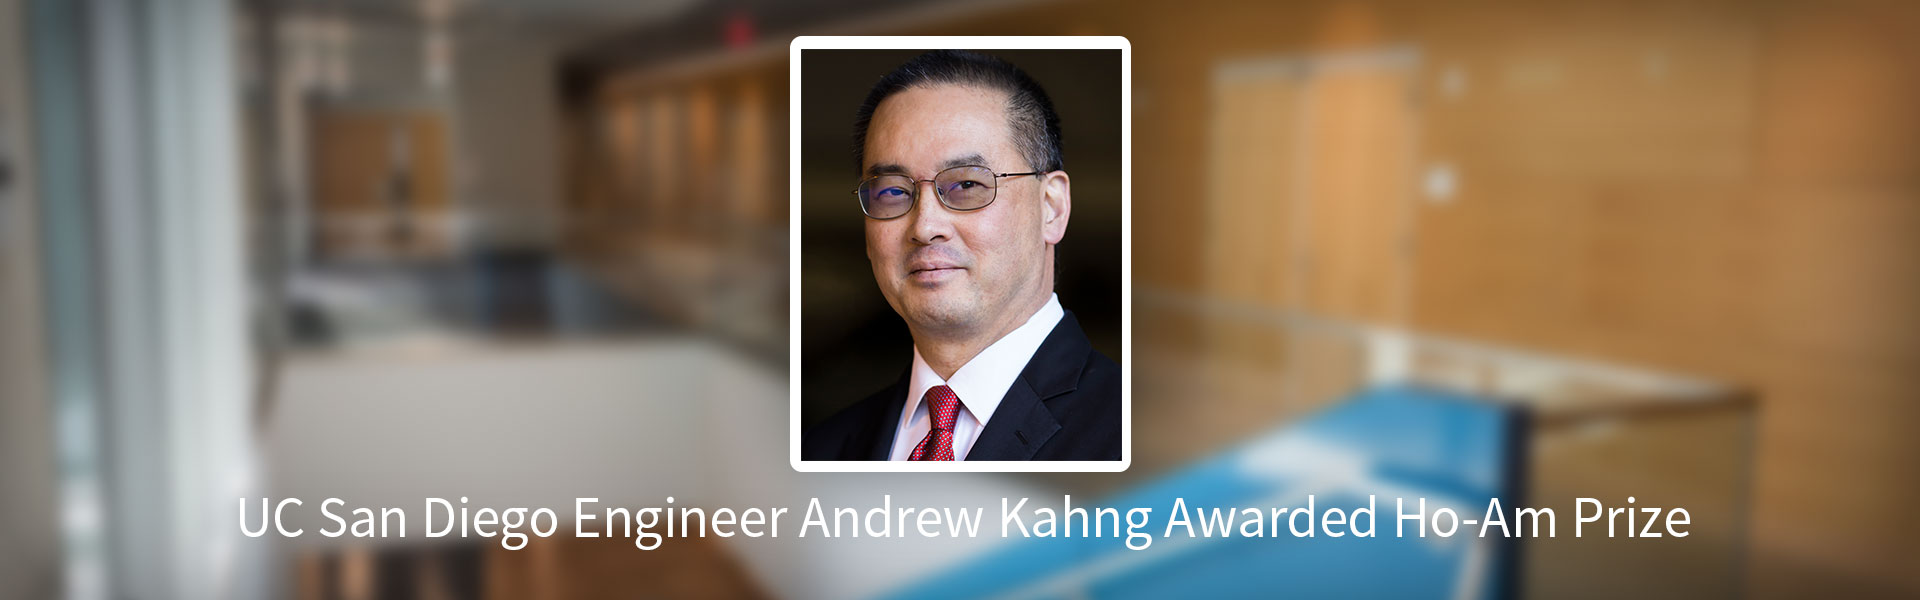 Andrew Kahng Awarded